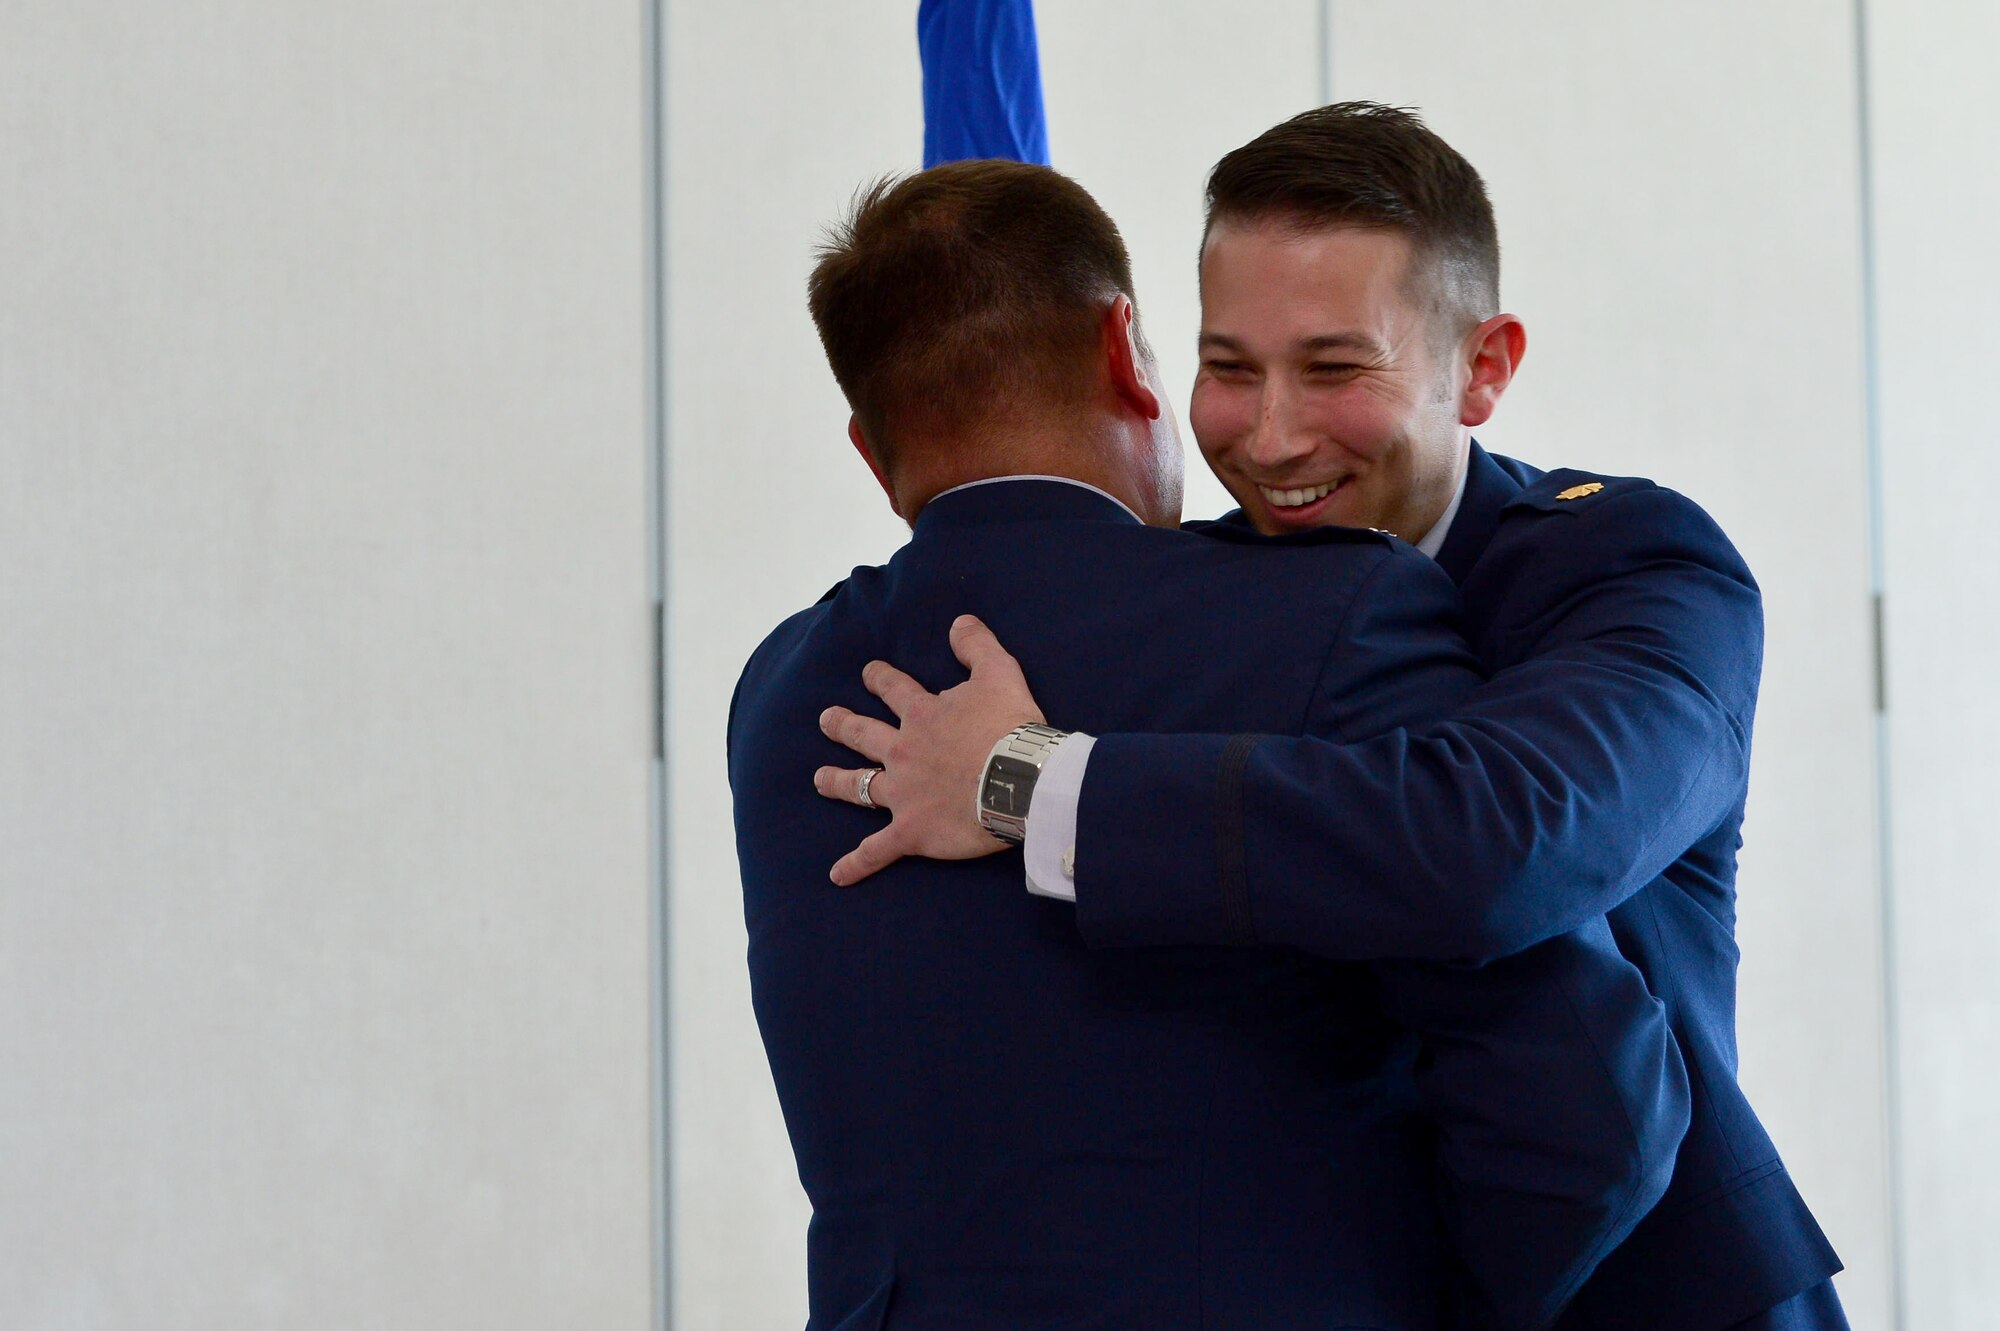 Maj. Phillip, 732nd Operations Group chief of intelligence, hugs Lt. Col. Daniel Finkelstein, presiding officer of Maj. Phillip’s promotion, after his oath of office March 31, 2018, in Las Vegas. Phillip has served in the U.S. Air Force for 10 years and is proud to continue his family’s legacy as a third generation Airman. (U.S. Air Force photo by Airman 1st Class Haley Stevens)